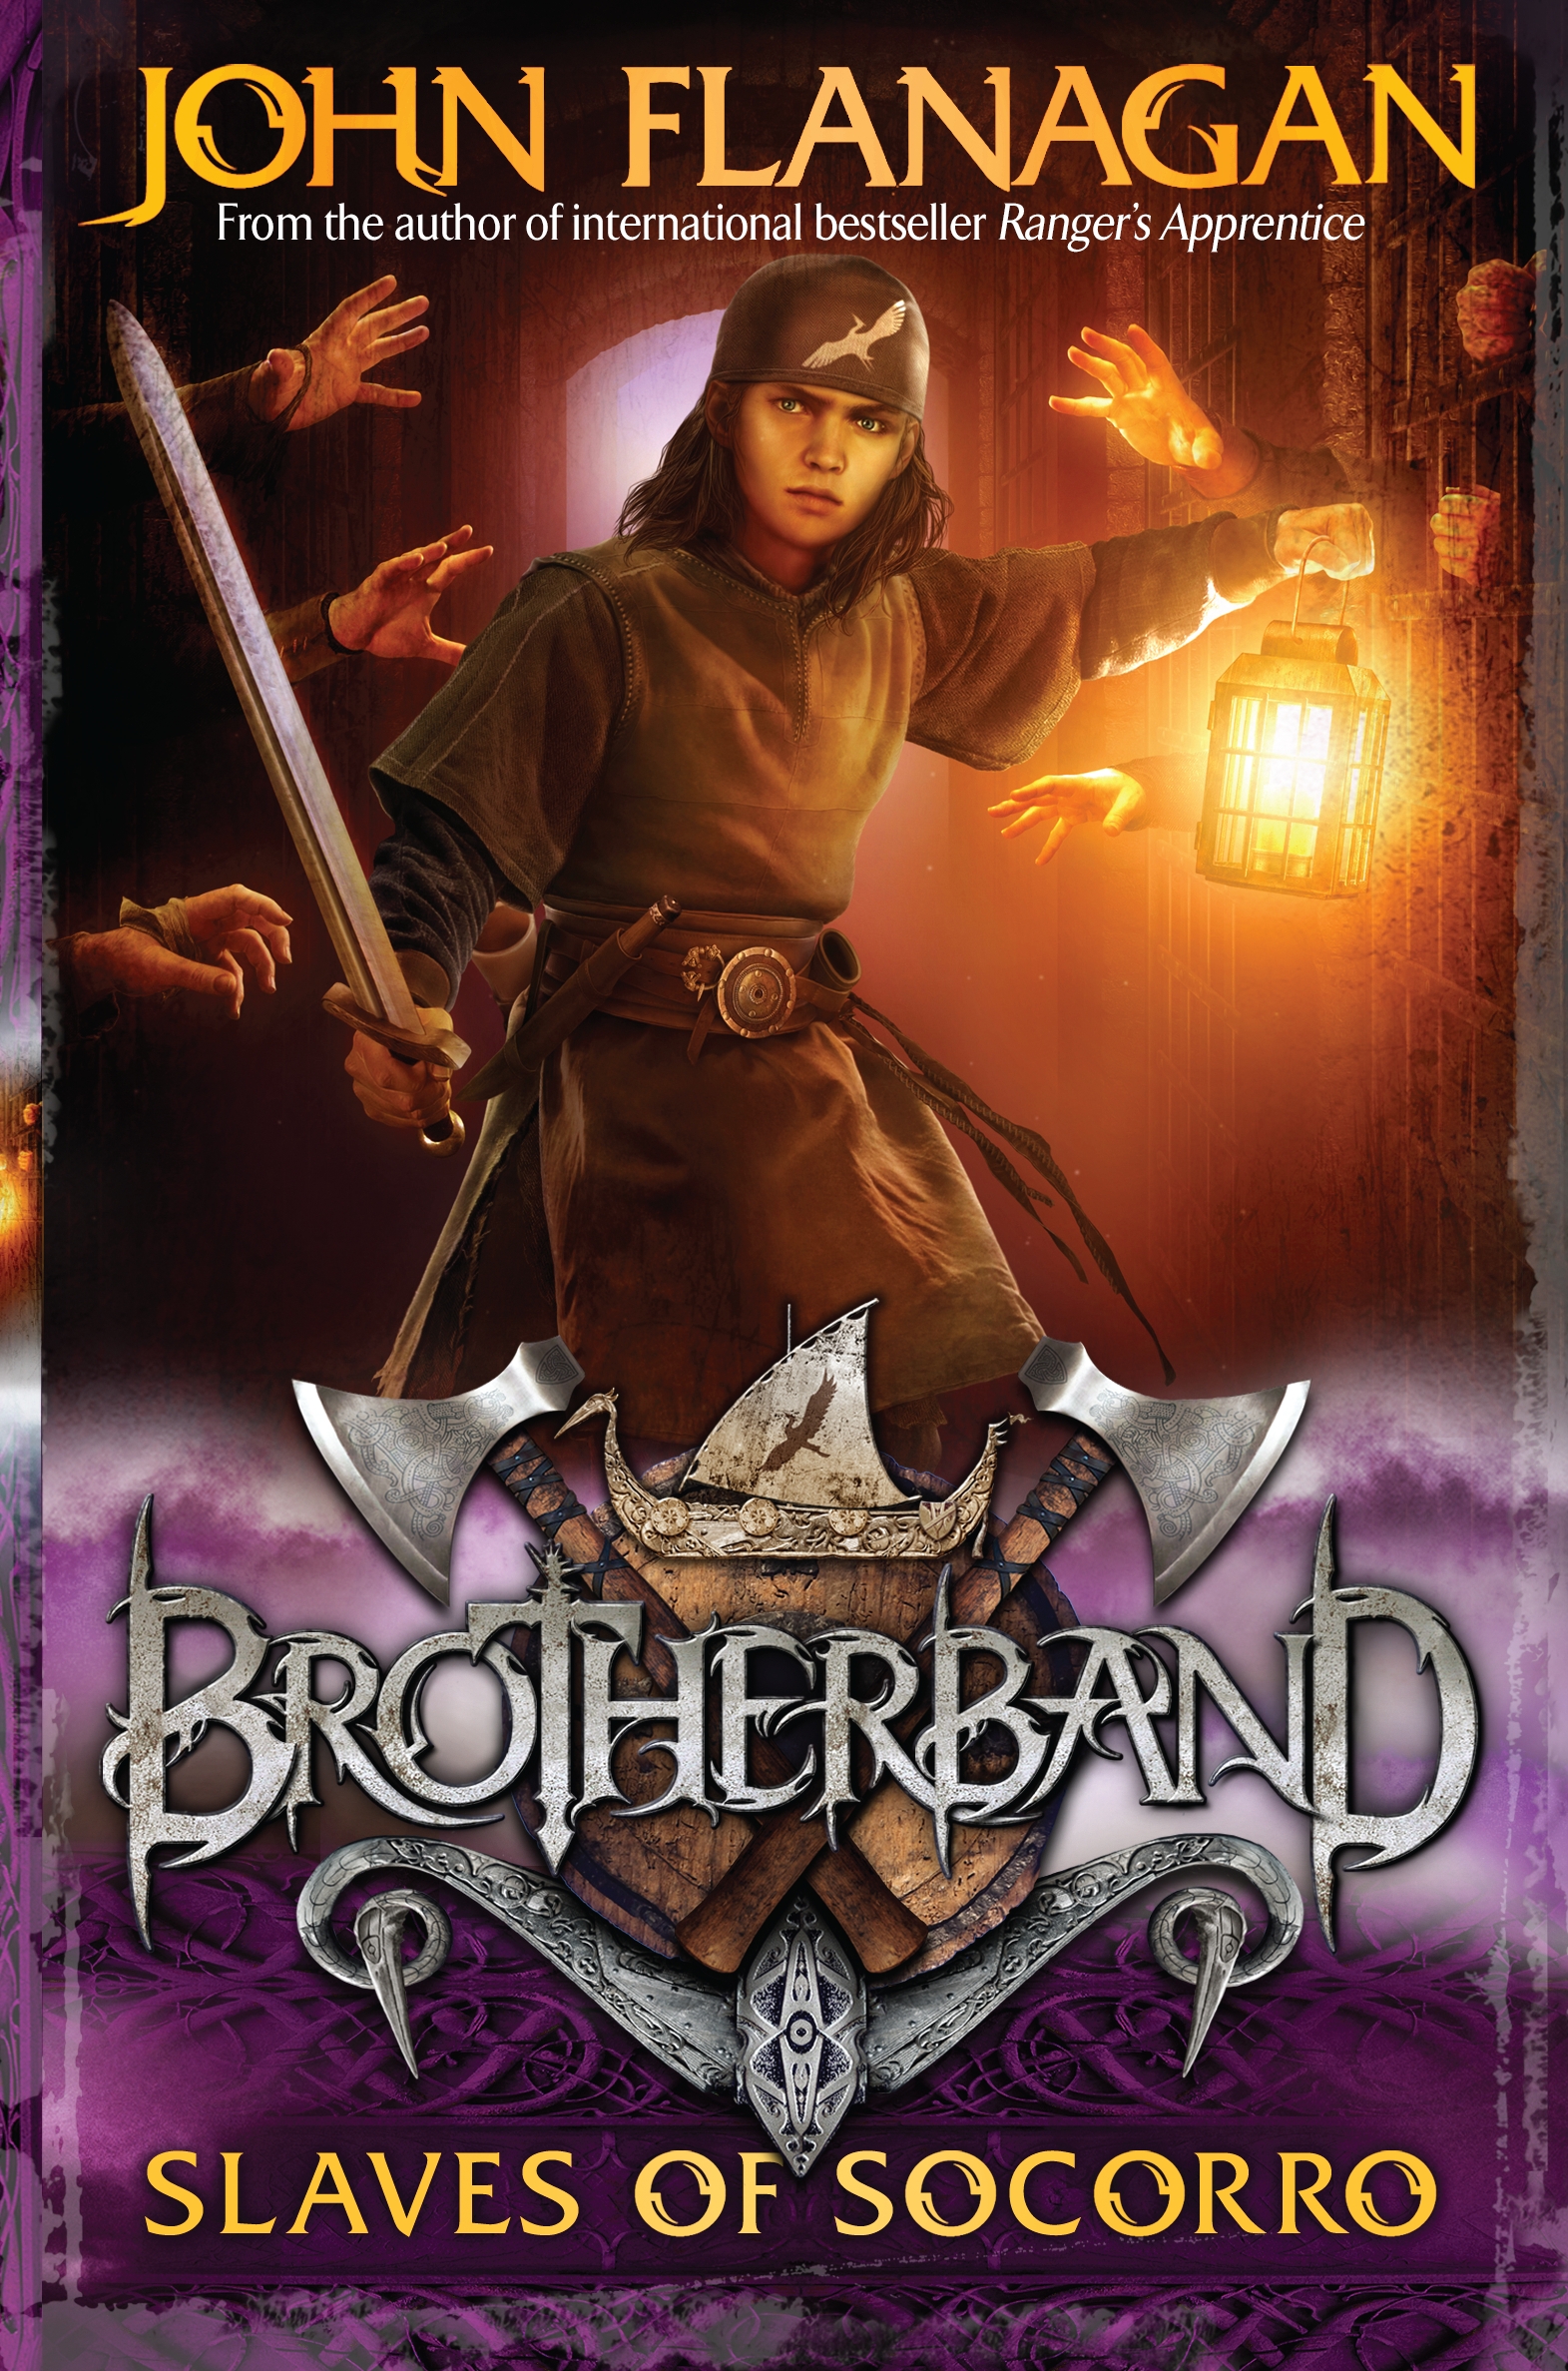 Read brotherband chronicles online, free